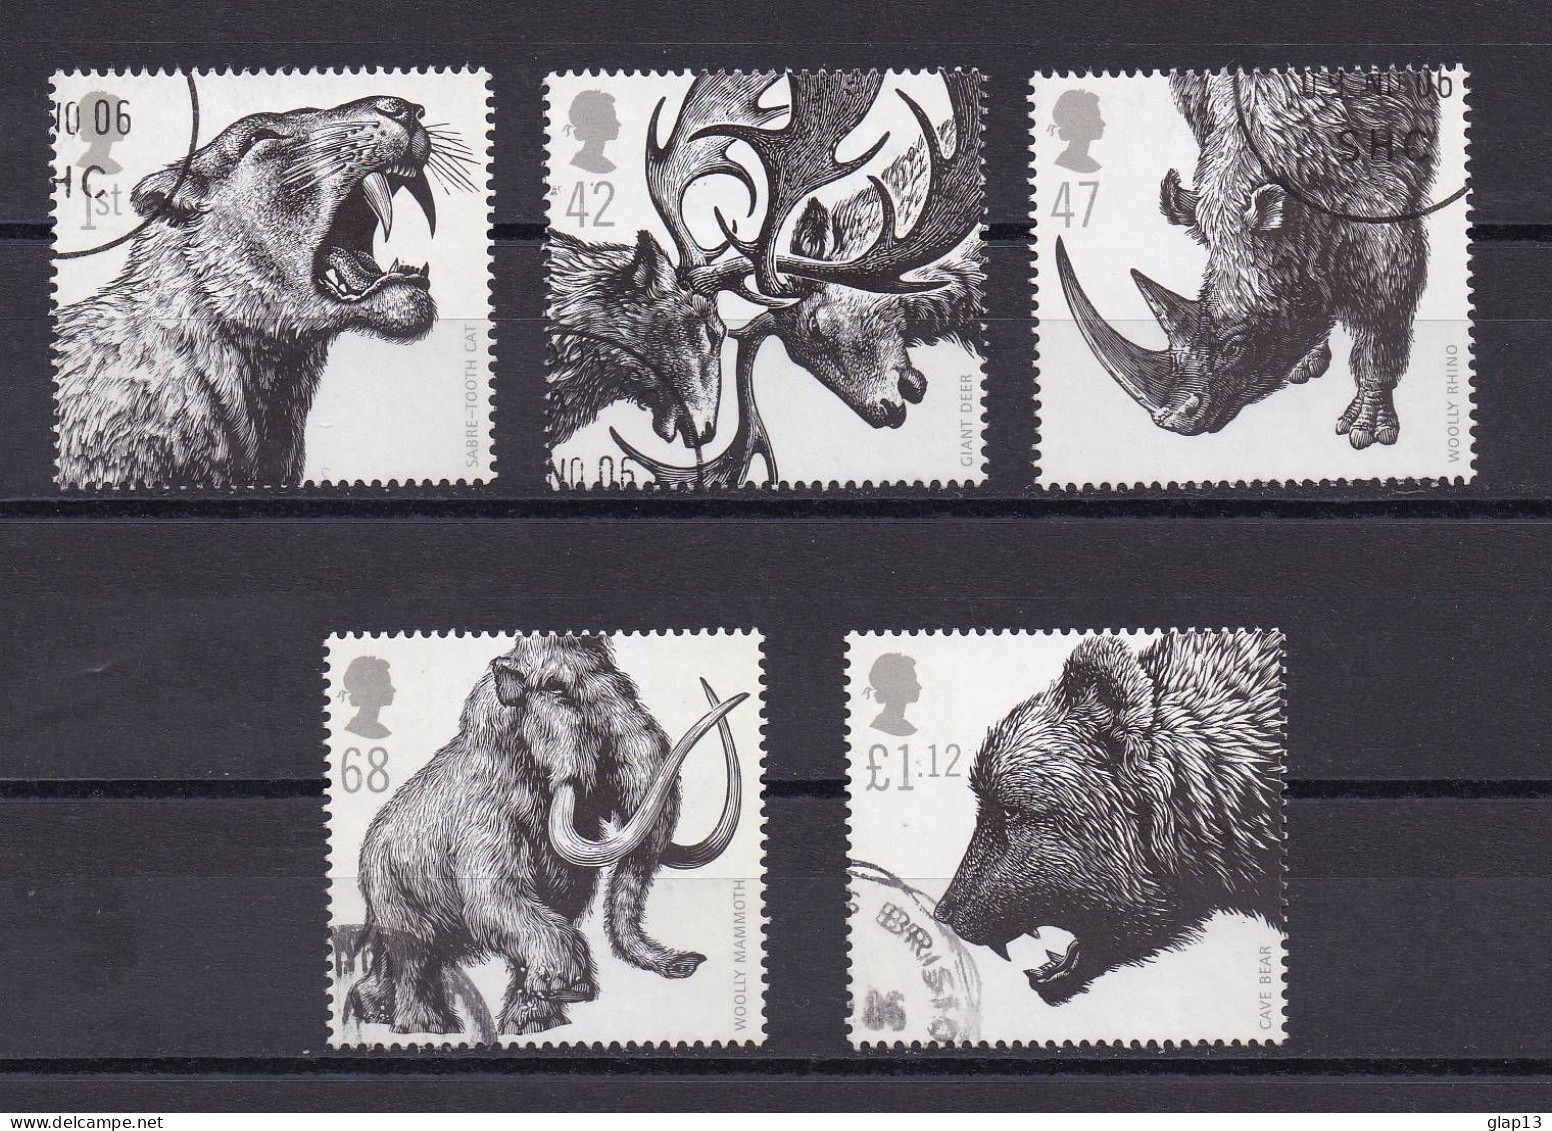 GRANDE-BRETAGNE 2006 TIMBRE N°2737/41 OBLITERE ANIMAUX PREHISTORIQUES - Used Stamps